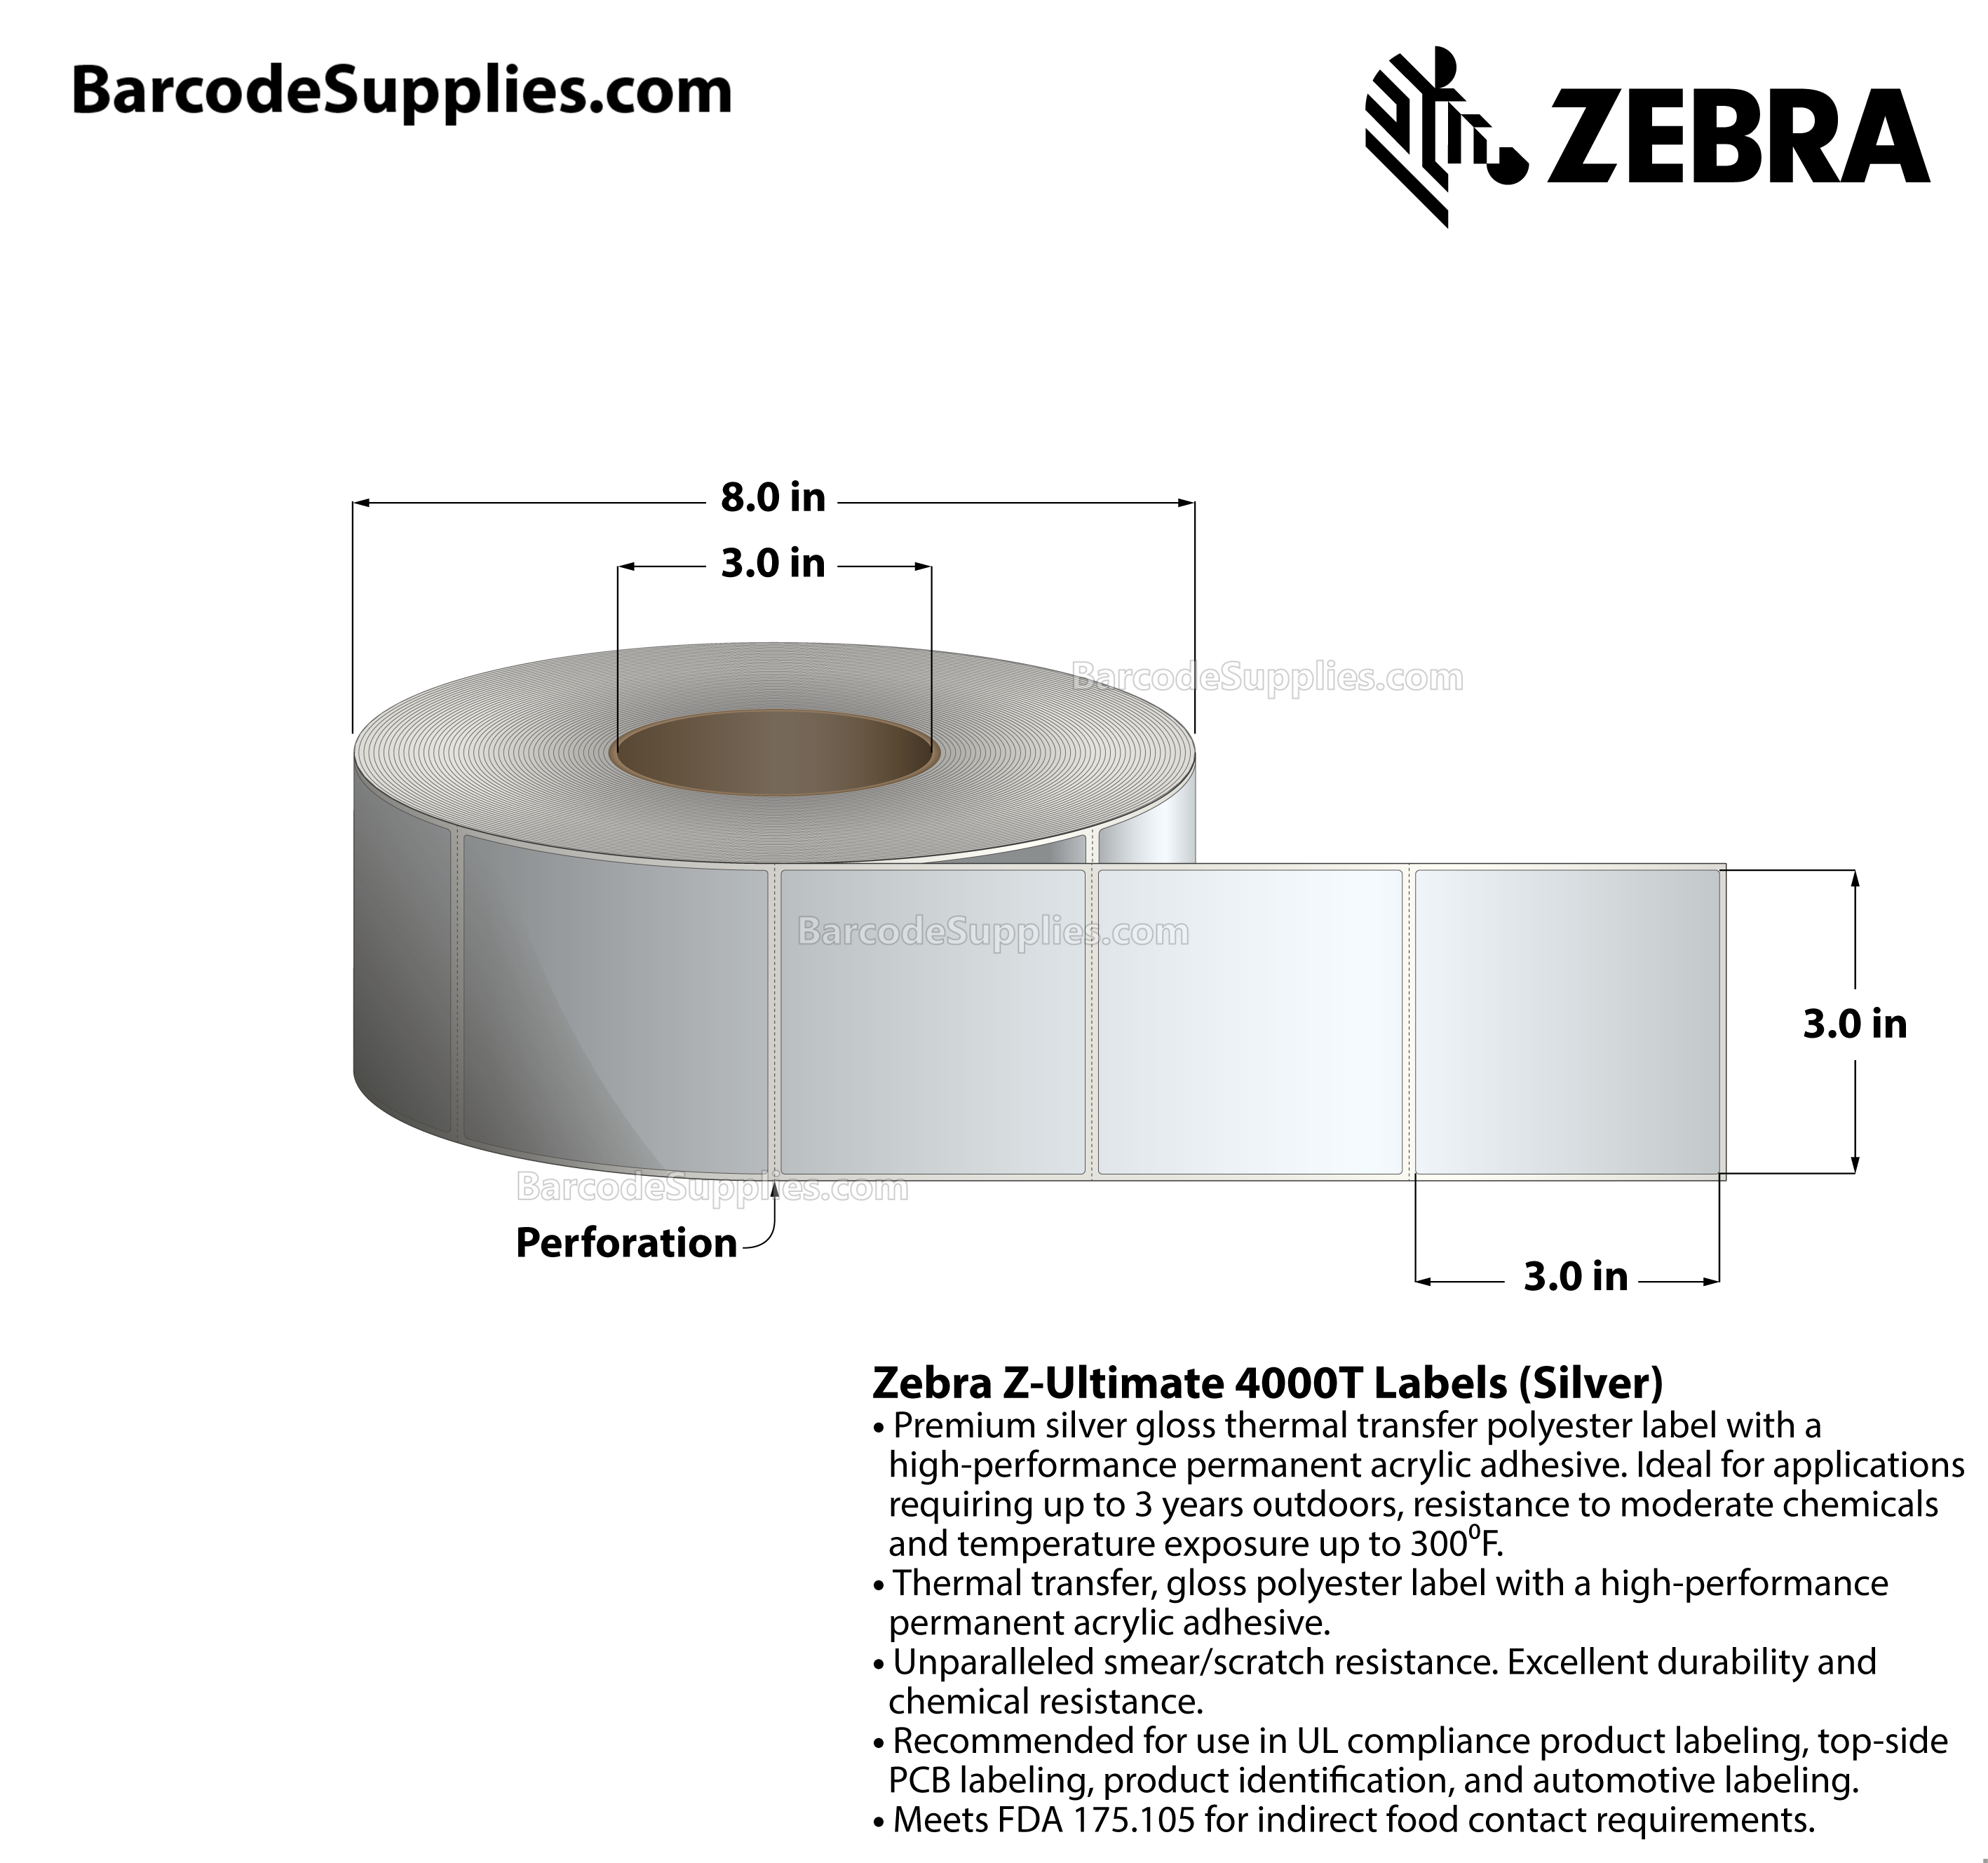 3 x 3 Thermal Transfer Silver Z-Ultimate 4000T Silver Labels With Permanent Adhesive - Perforated - 1000 Labels Per Roll - Carton Of 1 Rolls - 1000 Labels Total - MPN: 10023159